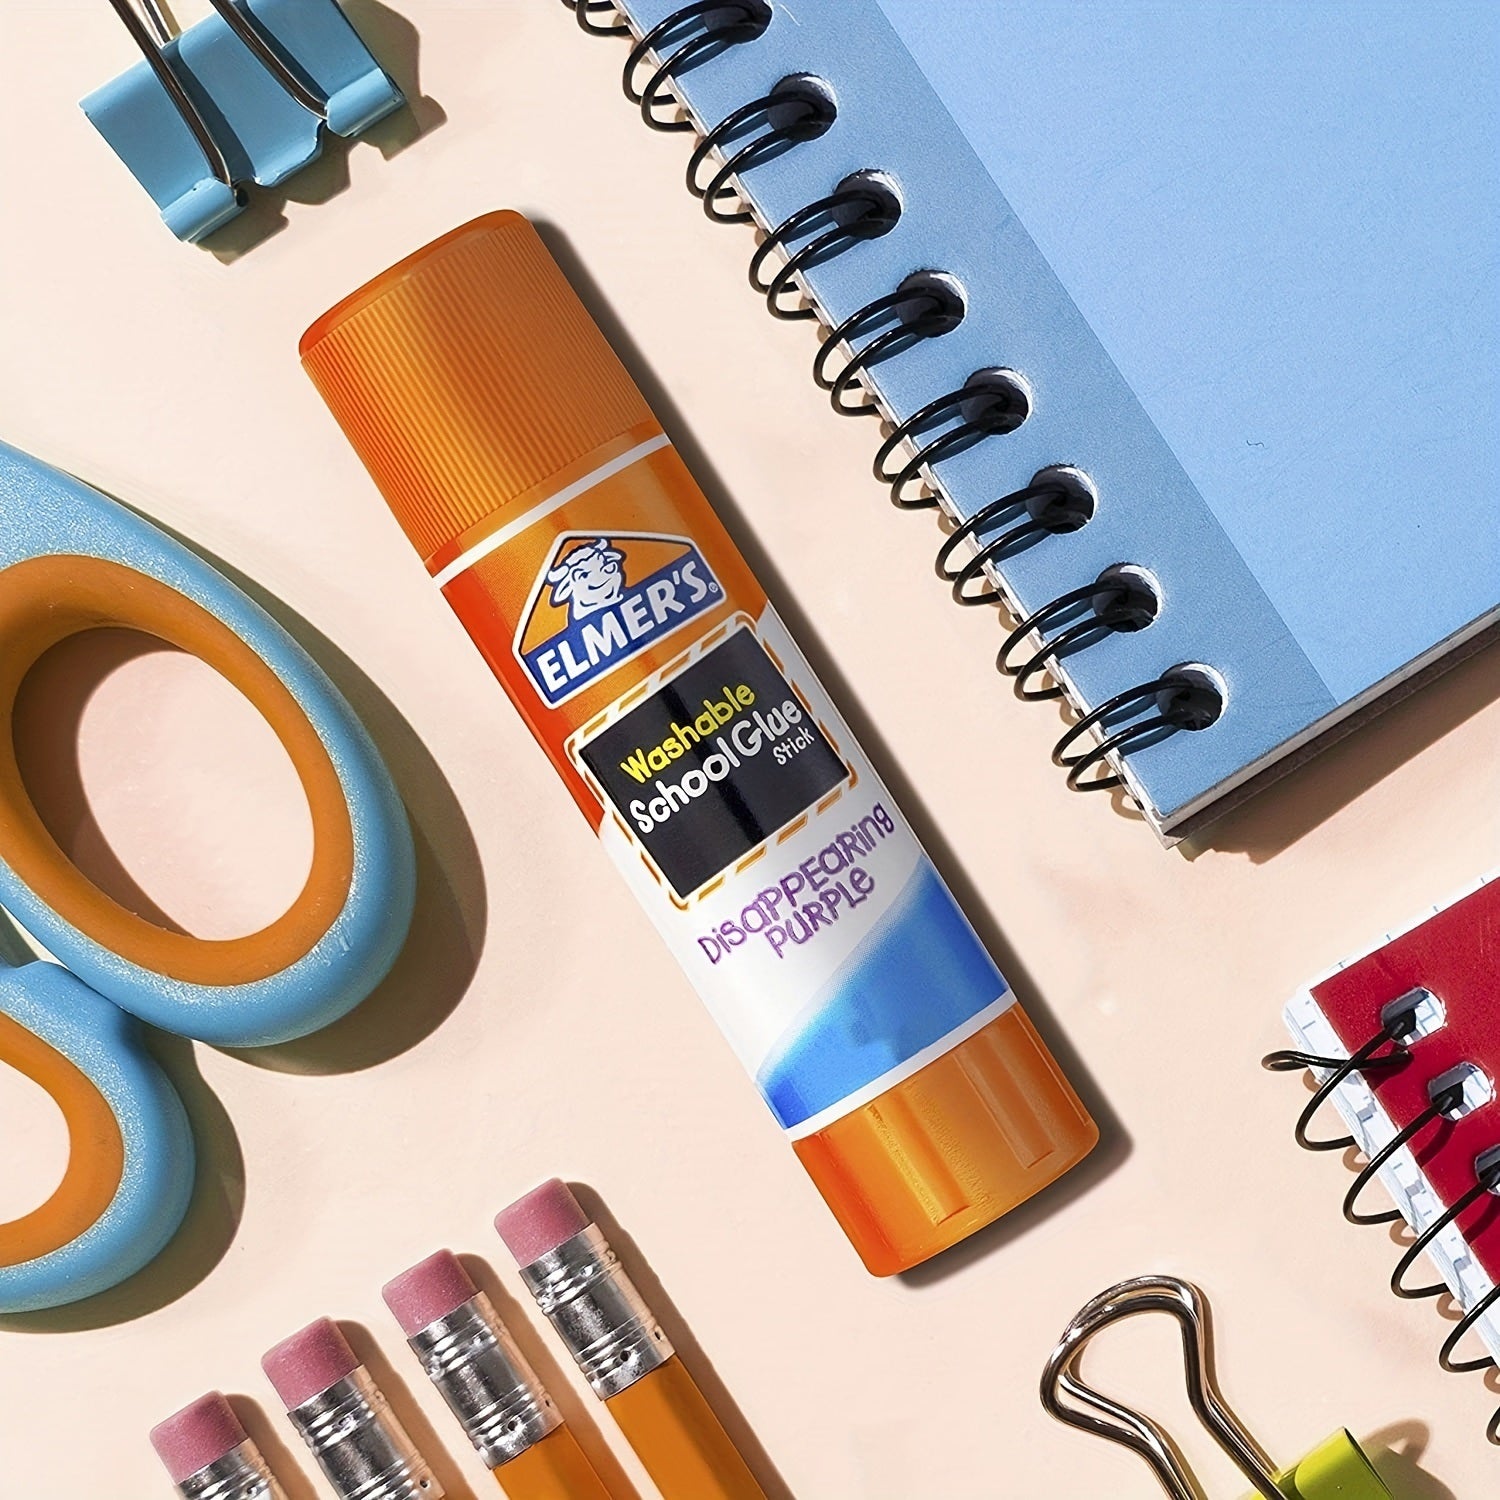 Primary School Glue Stick Washable Cow Head Glue Handmade Glue 8g Color Changing Glue Stick High Viscosity Solid Glue Strong Makeup To Cover Eyebrows